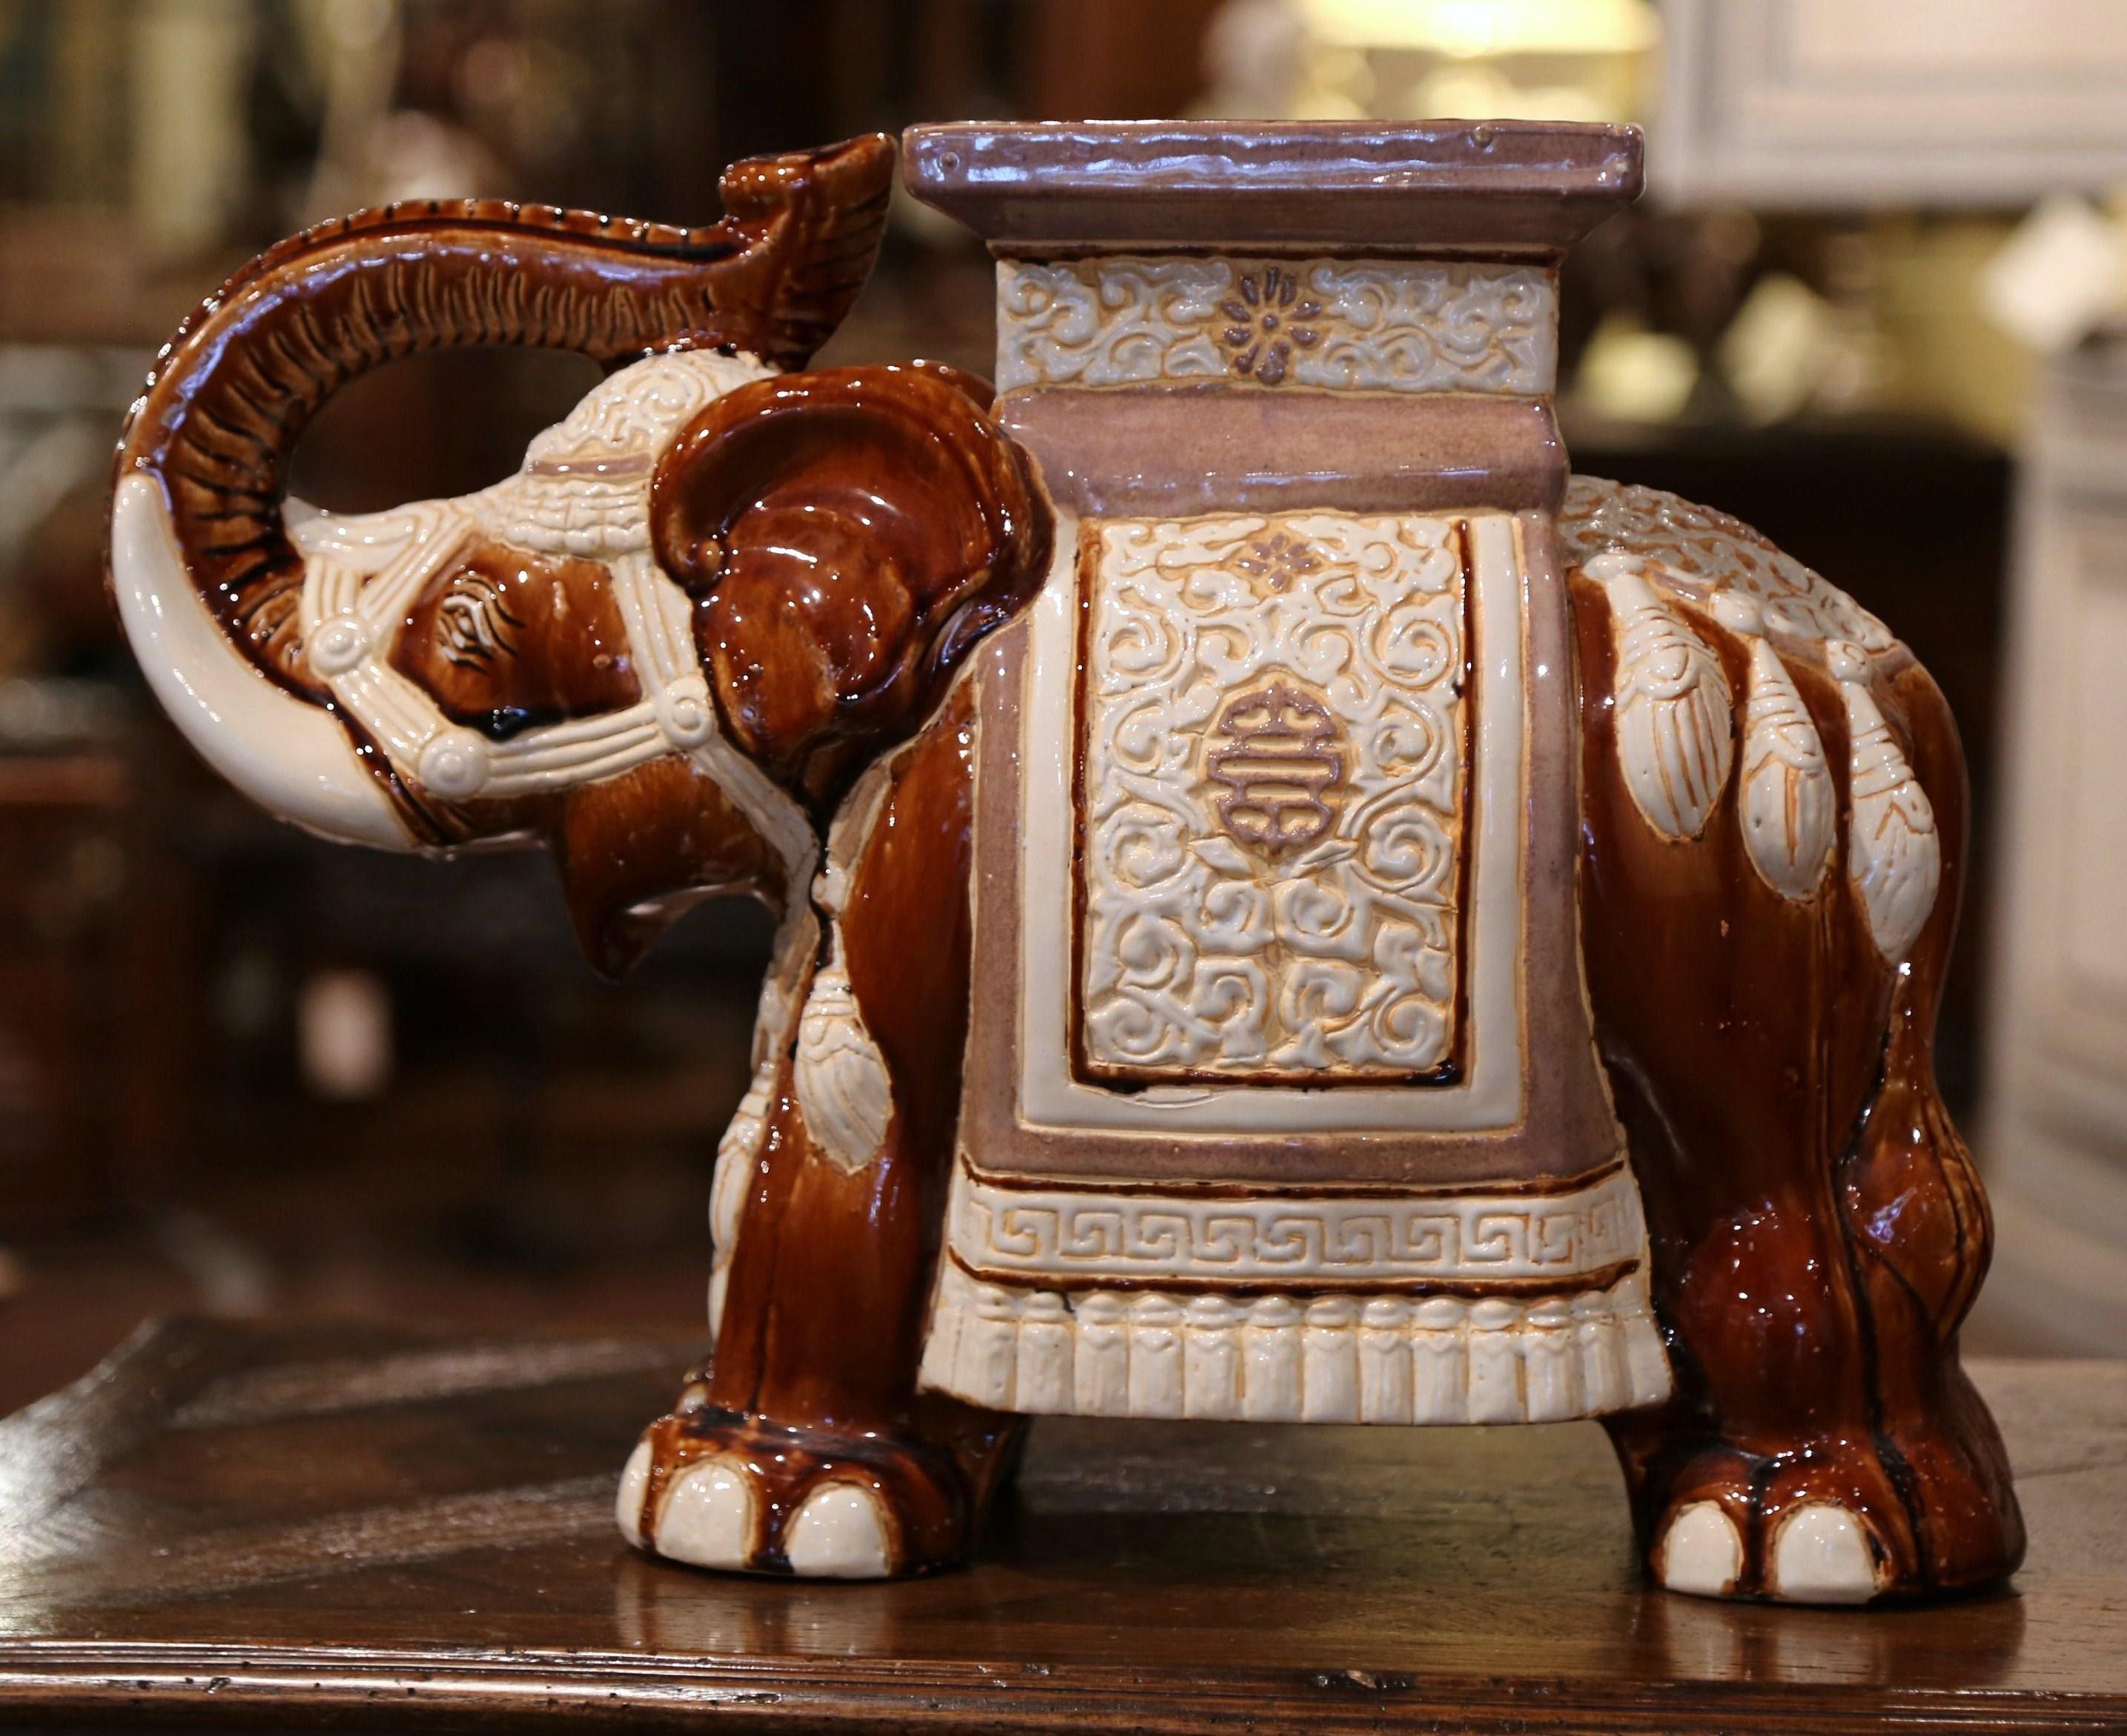 This interesting, vintage porcelain garden seat was found in France. Crafted circa 1960, the ceramic seating shaped as an elephant with his trunk raised (good luck sign in Asia), is heavily decorated in oriental finery, the colorful mammal has a